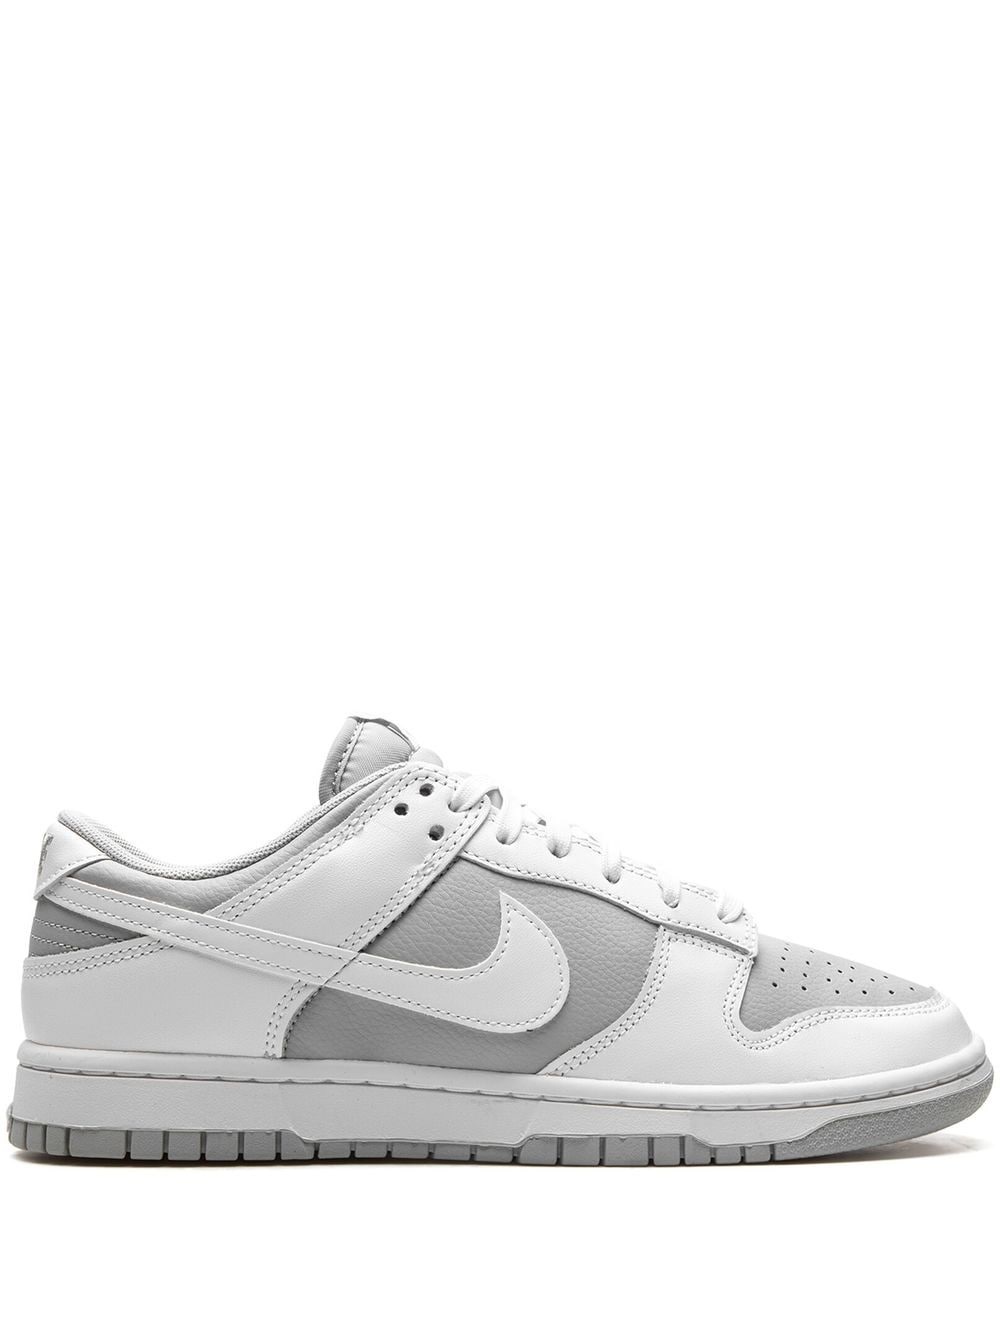 Dunk Low "White/Grey" sneakers - 1